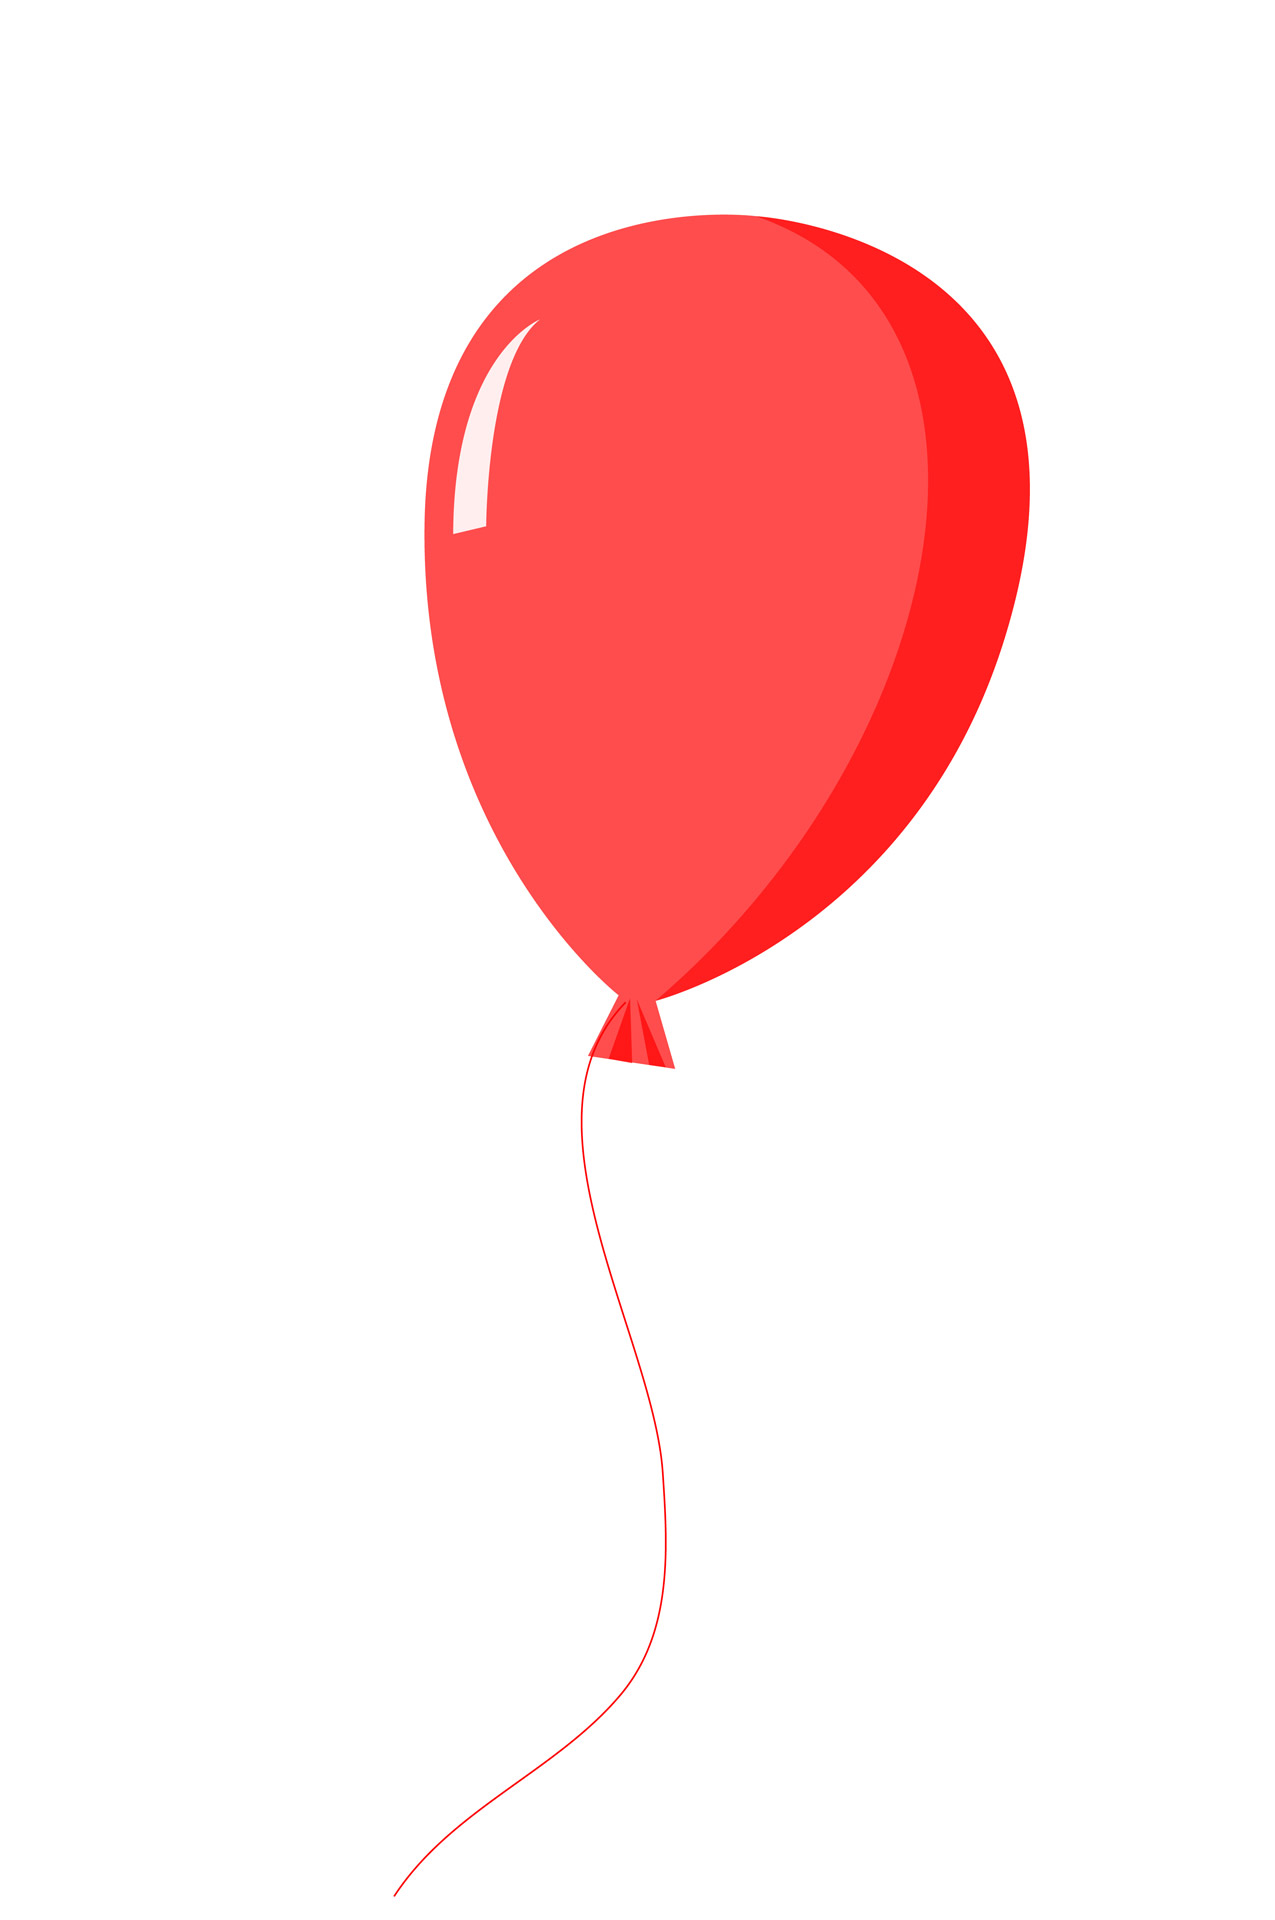 Birthday Balloons Transparent Background Clip Art Library